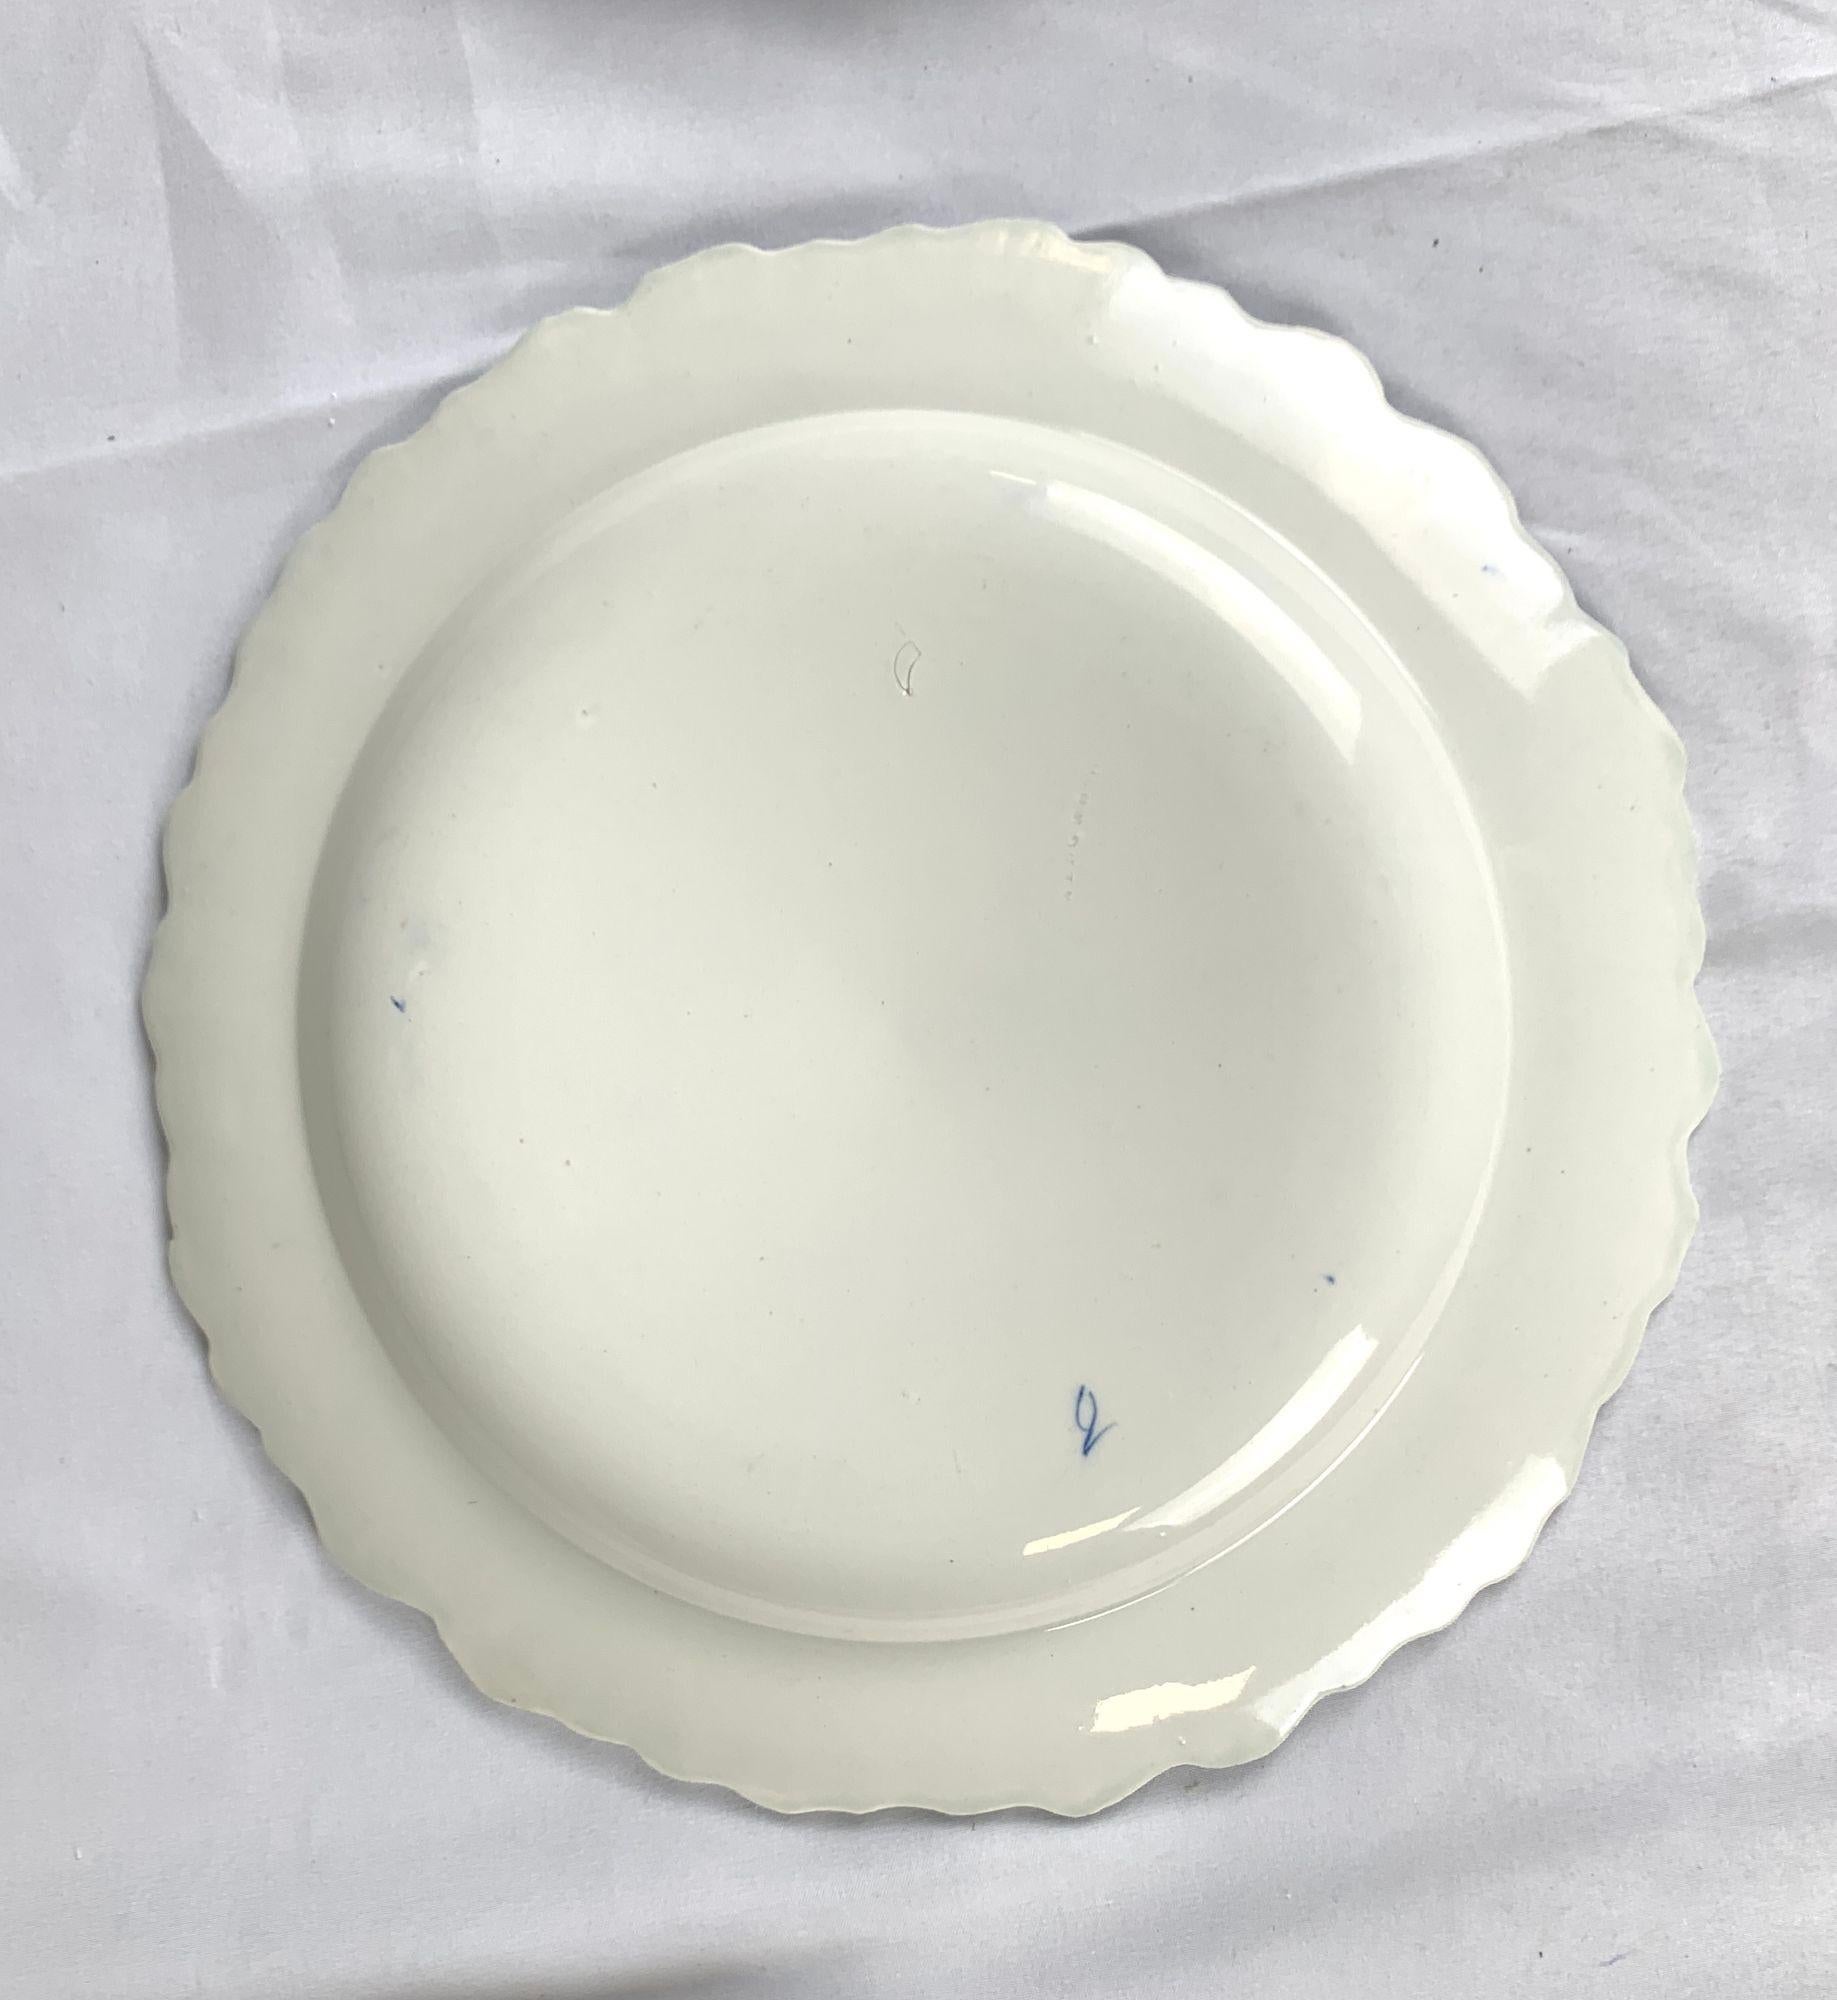 Earthenware Set Eight Wedgwood Dinner Plates Mared Pattern Made England Circa 1840 For Sale